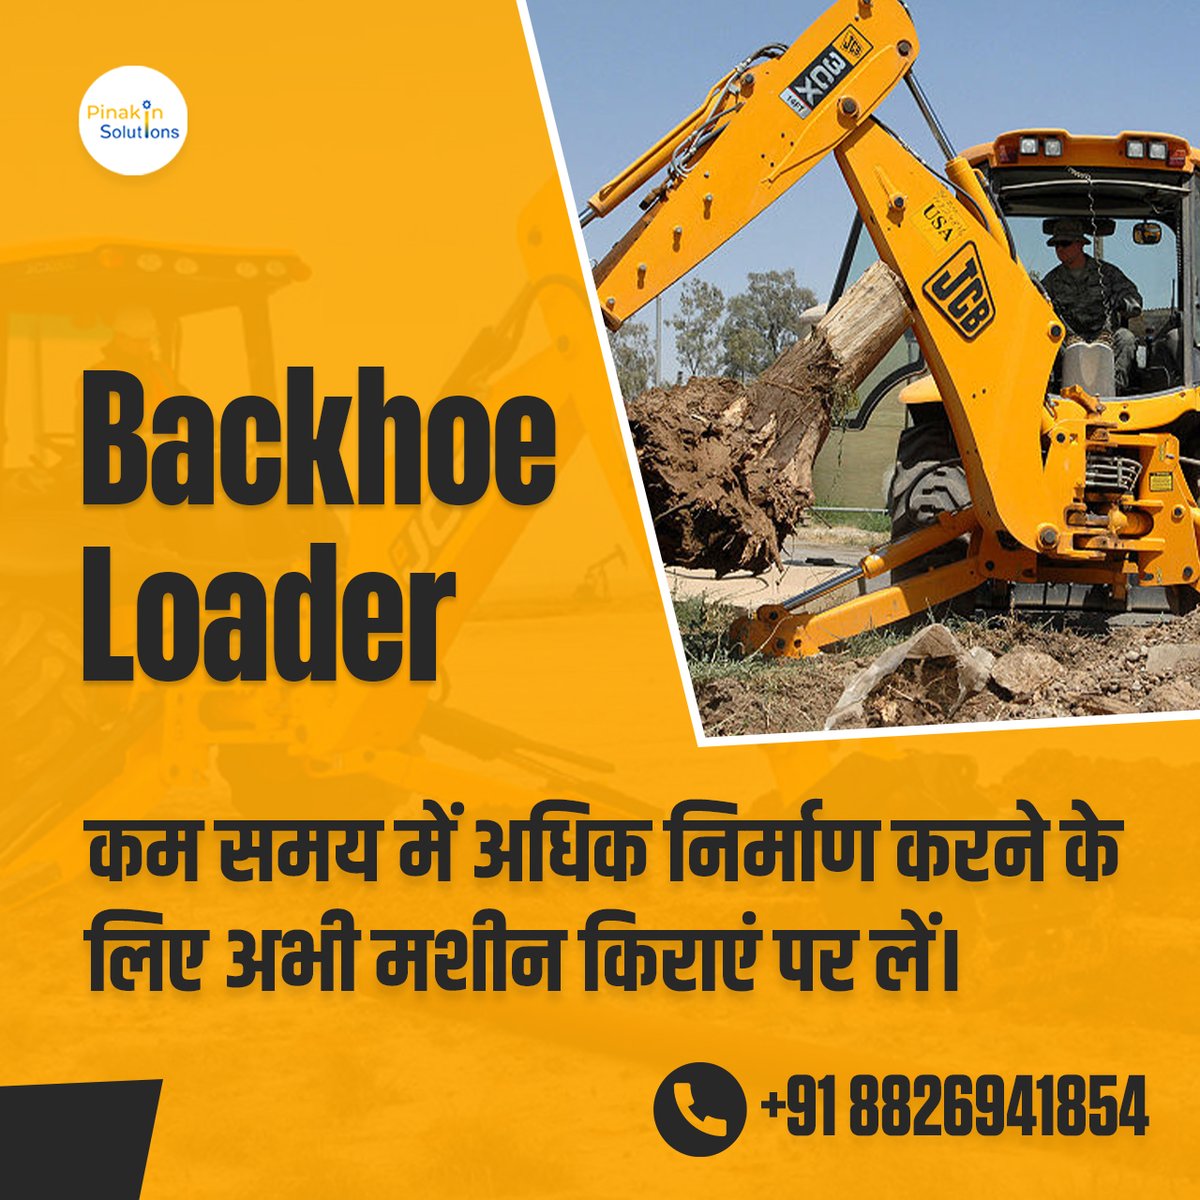 Introducing the ultimate powerhouse in construction equipment! 🏗️🚜 Unleash the true potential of your projects with our versatile Backhoe Loader.

#ConstructionGoals #HeavyEquipment #BackhoeLoader #pinakins #constructionmachinery  #backhoeloaderrentalservices